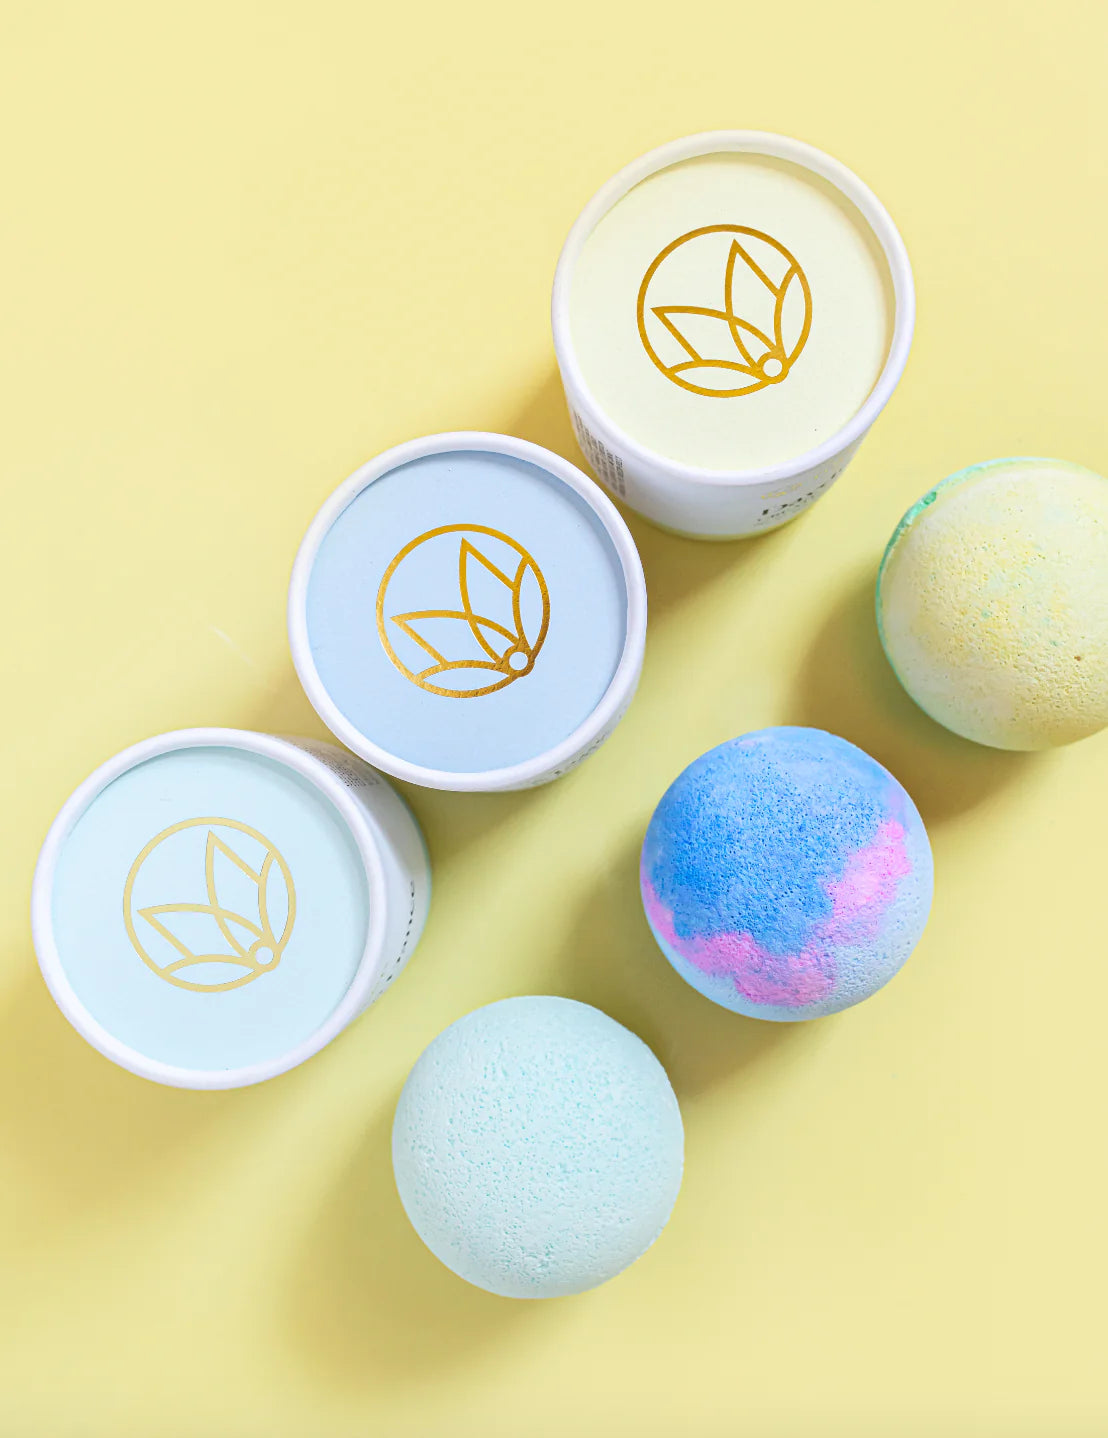 Musee Bath Balms: Daydreamer Therapy